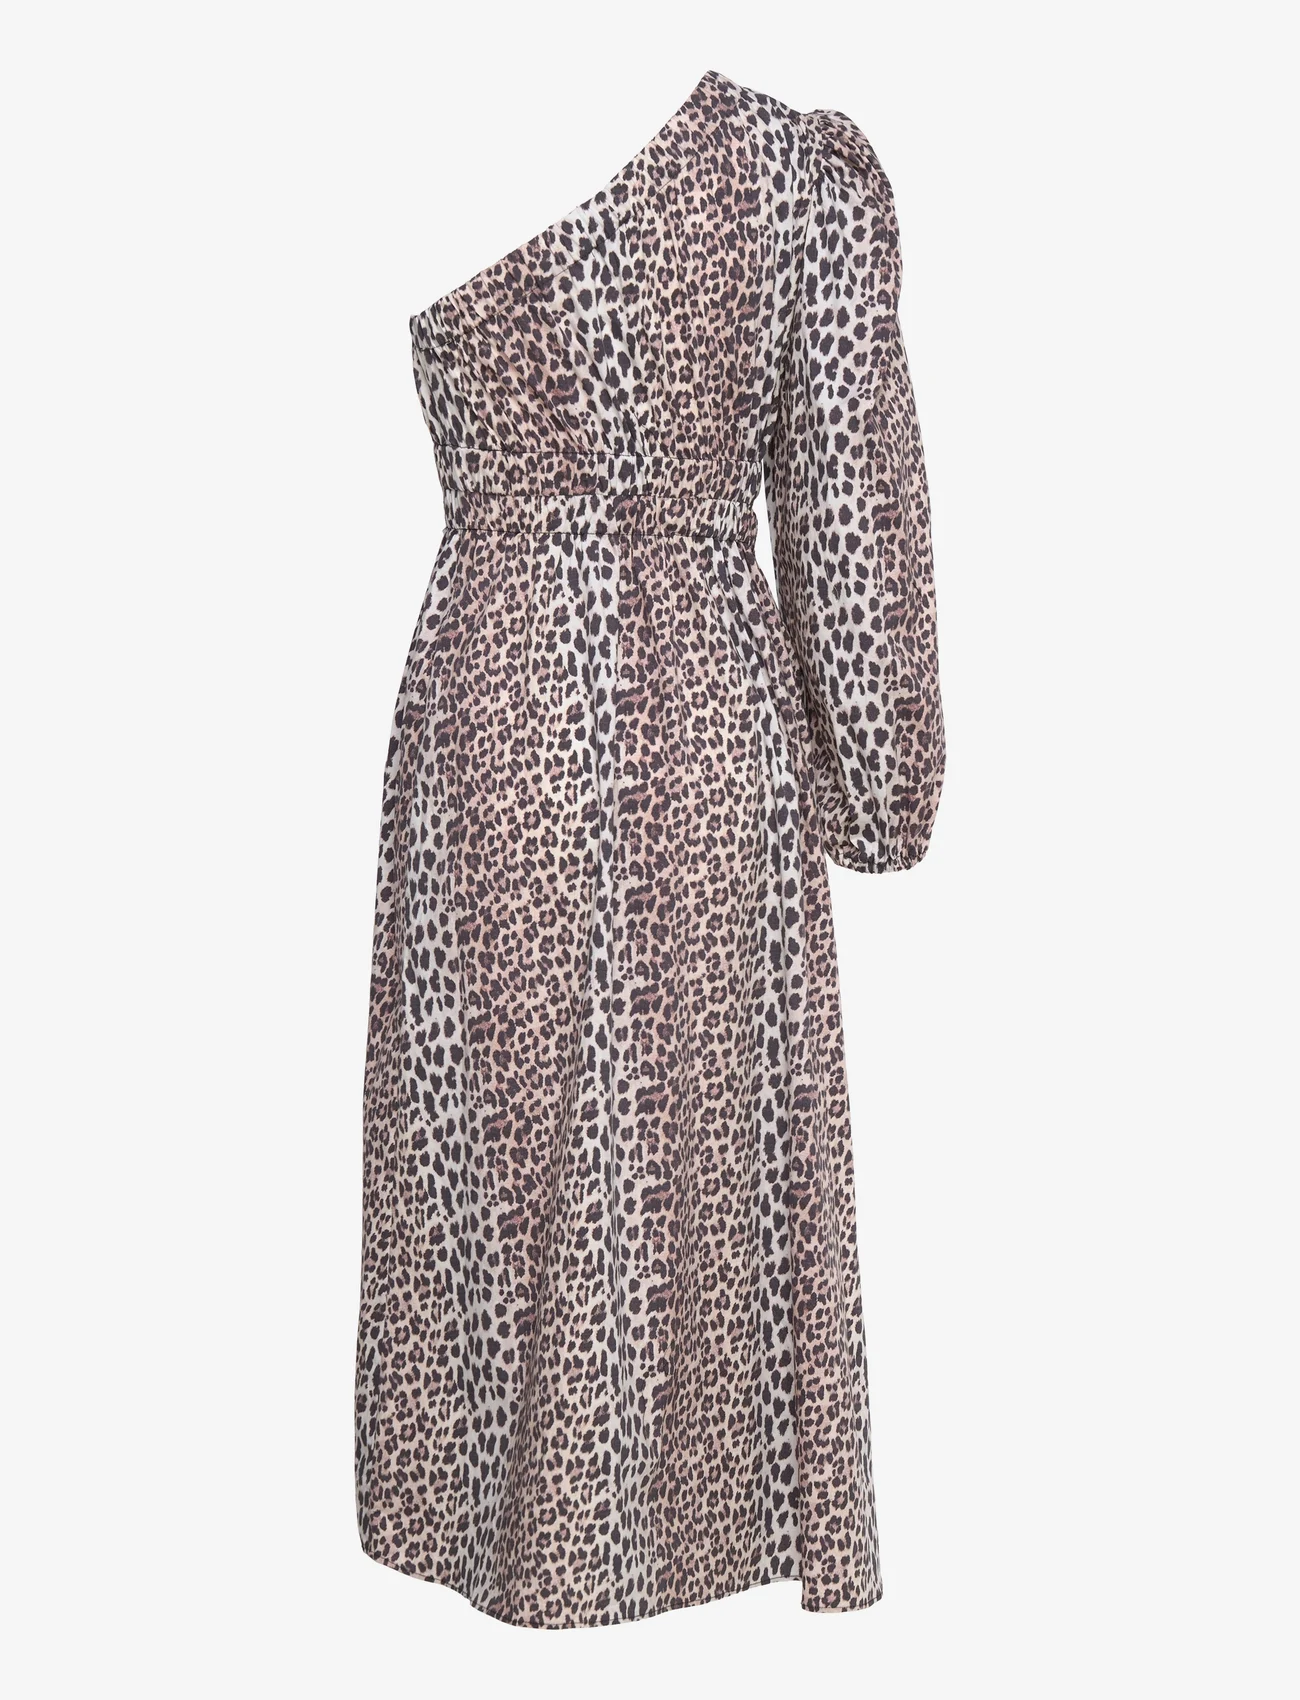 Notes du Nord - Dassy One Shoulder Dress - party wear at outlet prices - leopard - 1